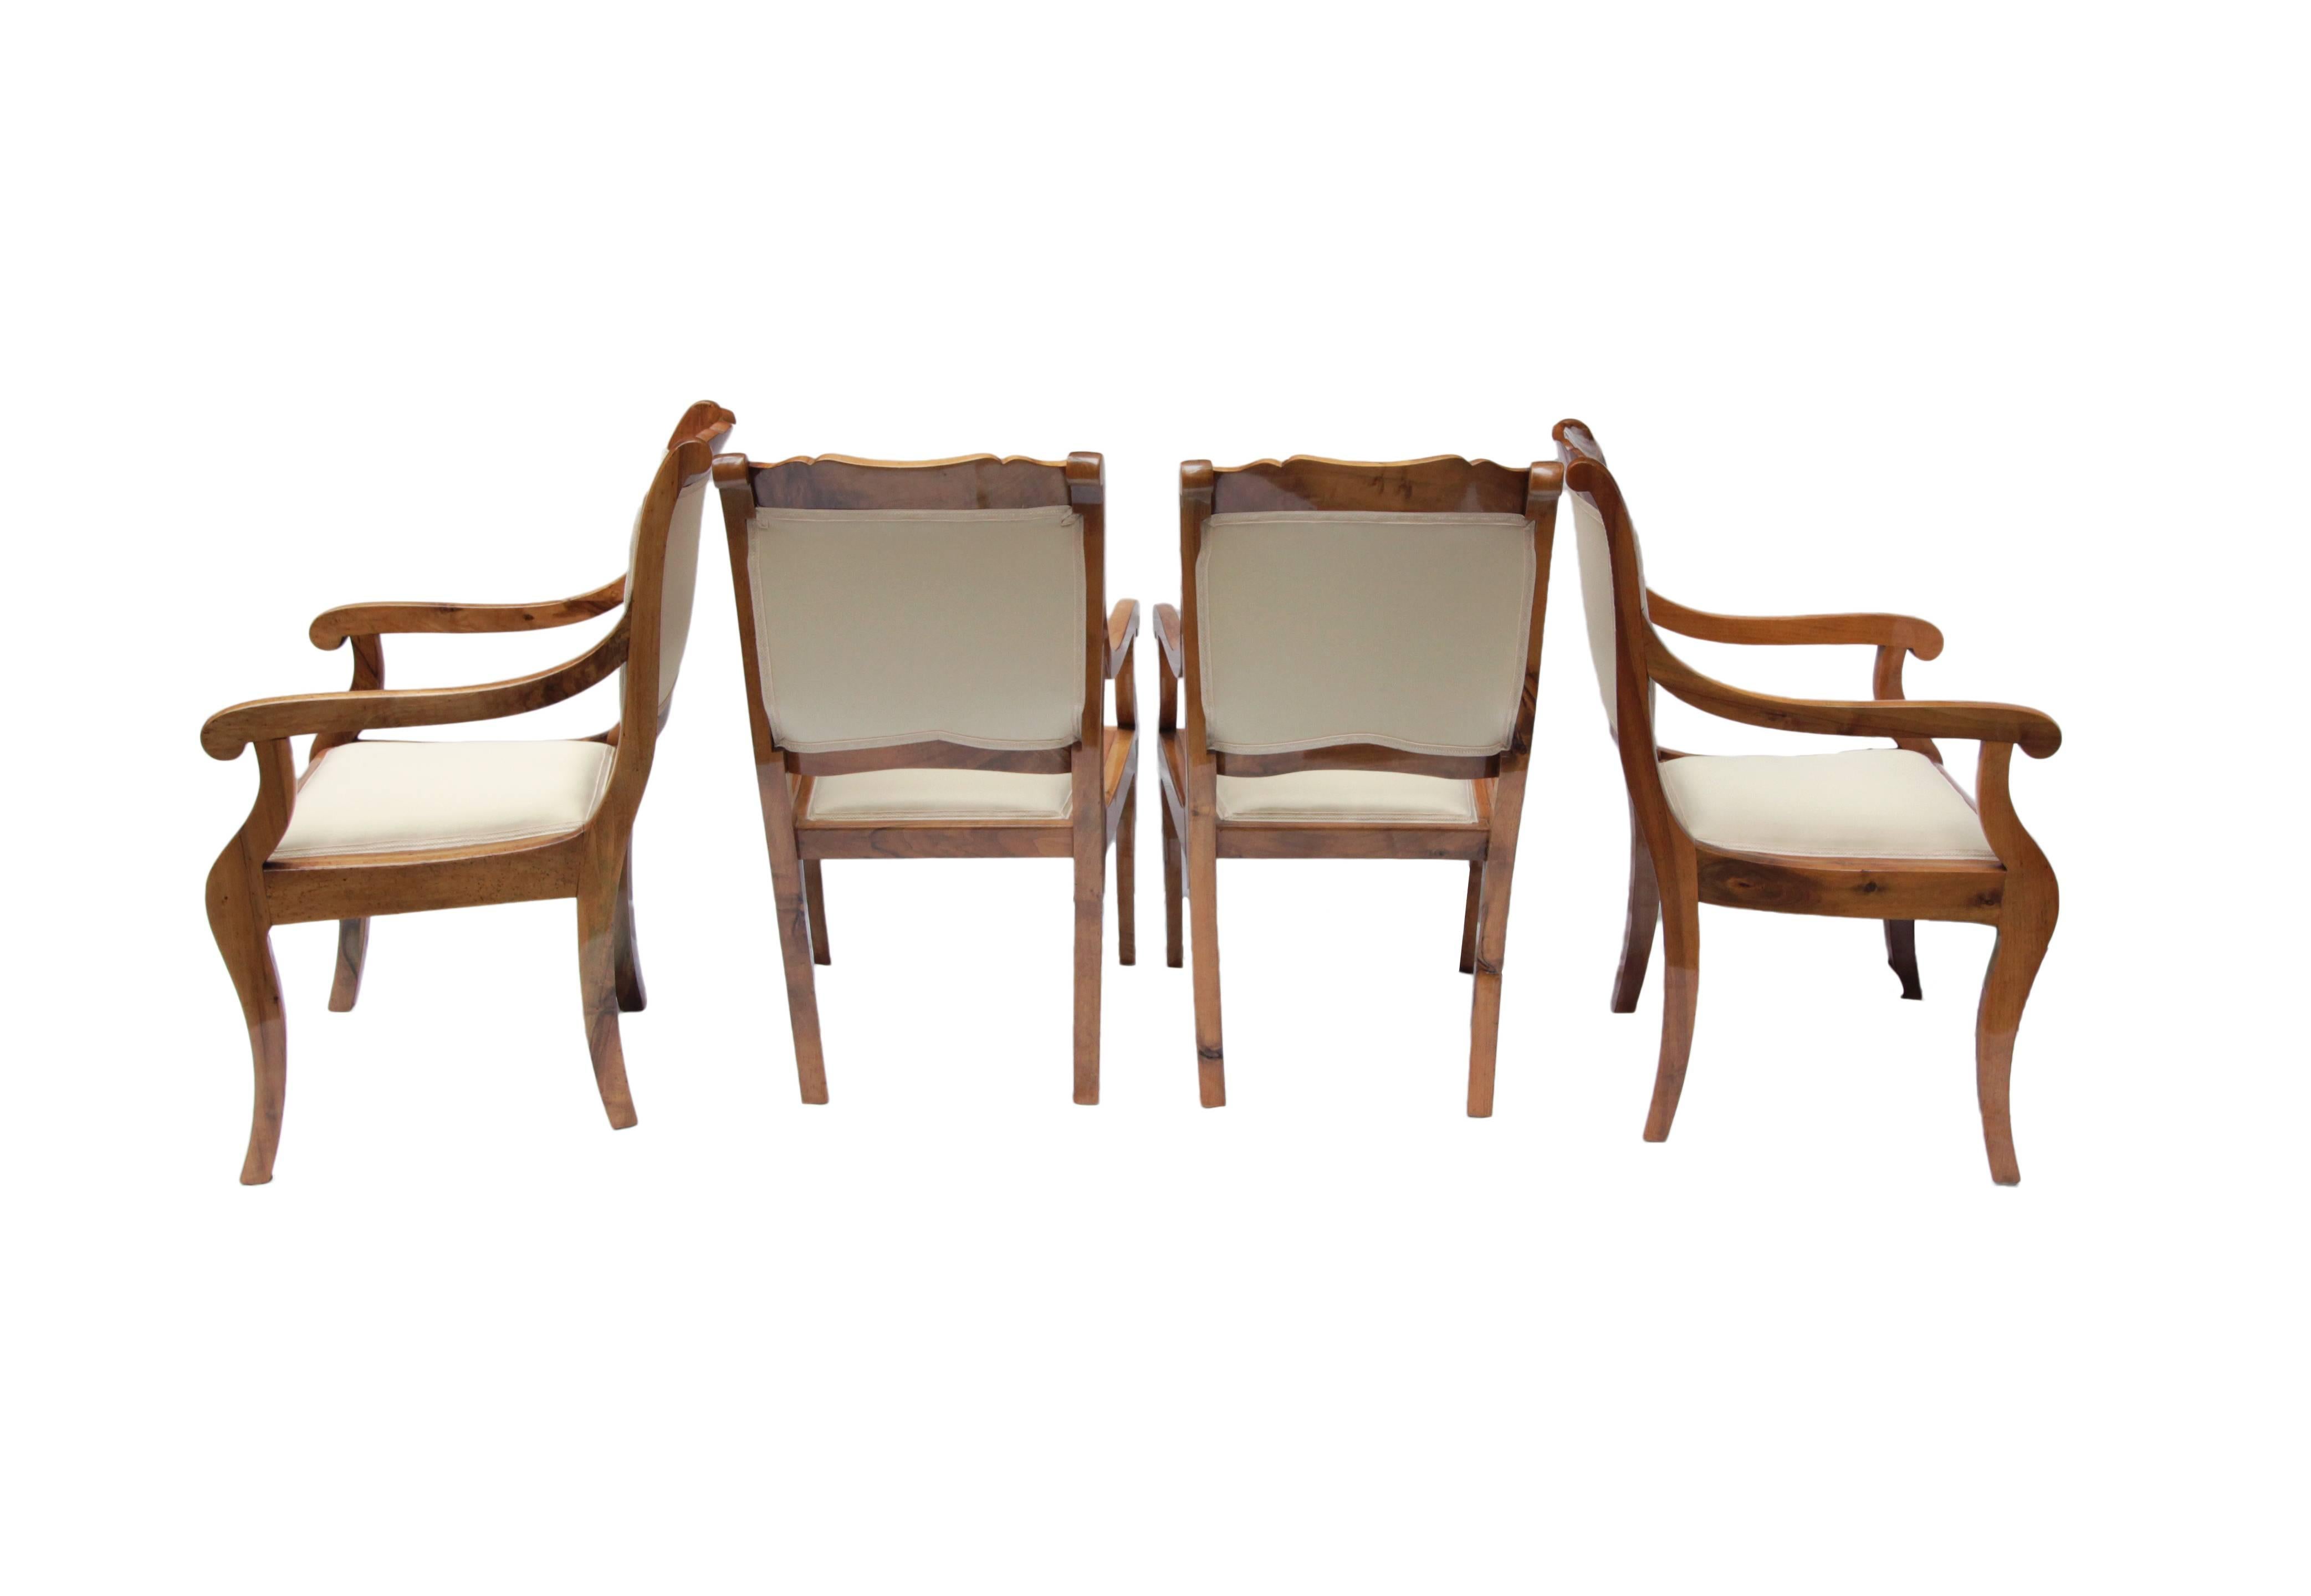 The rare set consists of four solid walnut armchairs from the Biedermeier period. The armchairs are newly upholstered and very well restored. The seat height is relatively high, so you can sit well at a table.